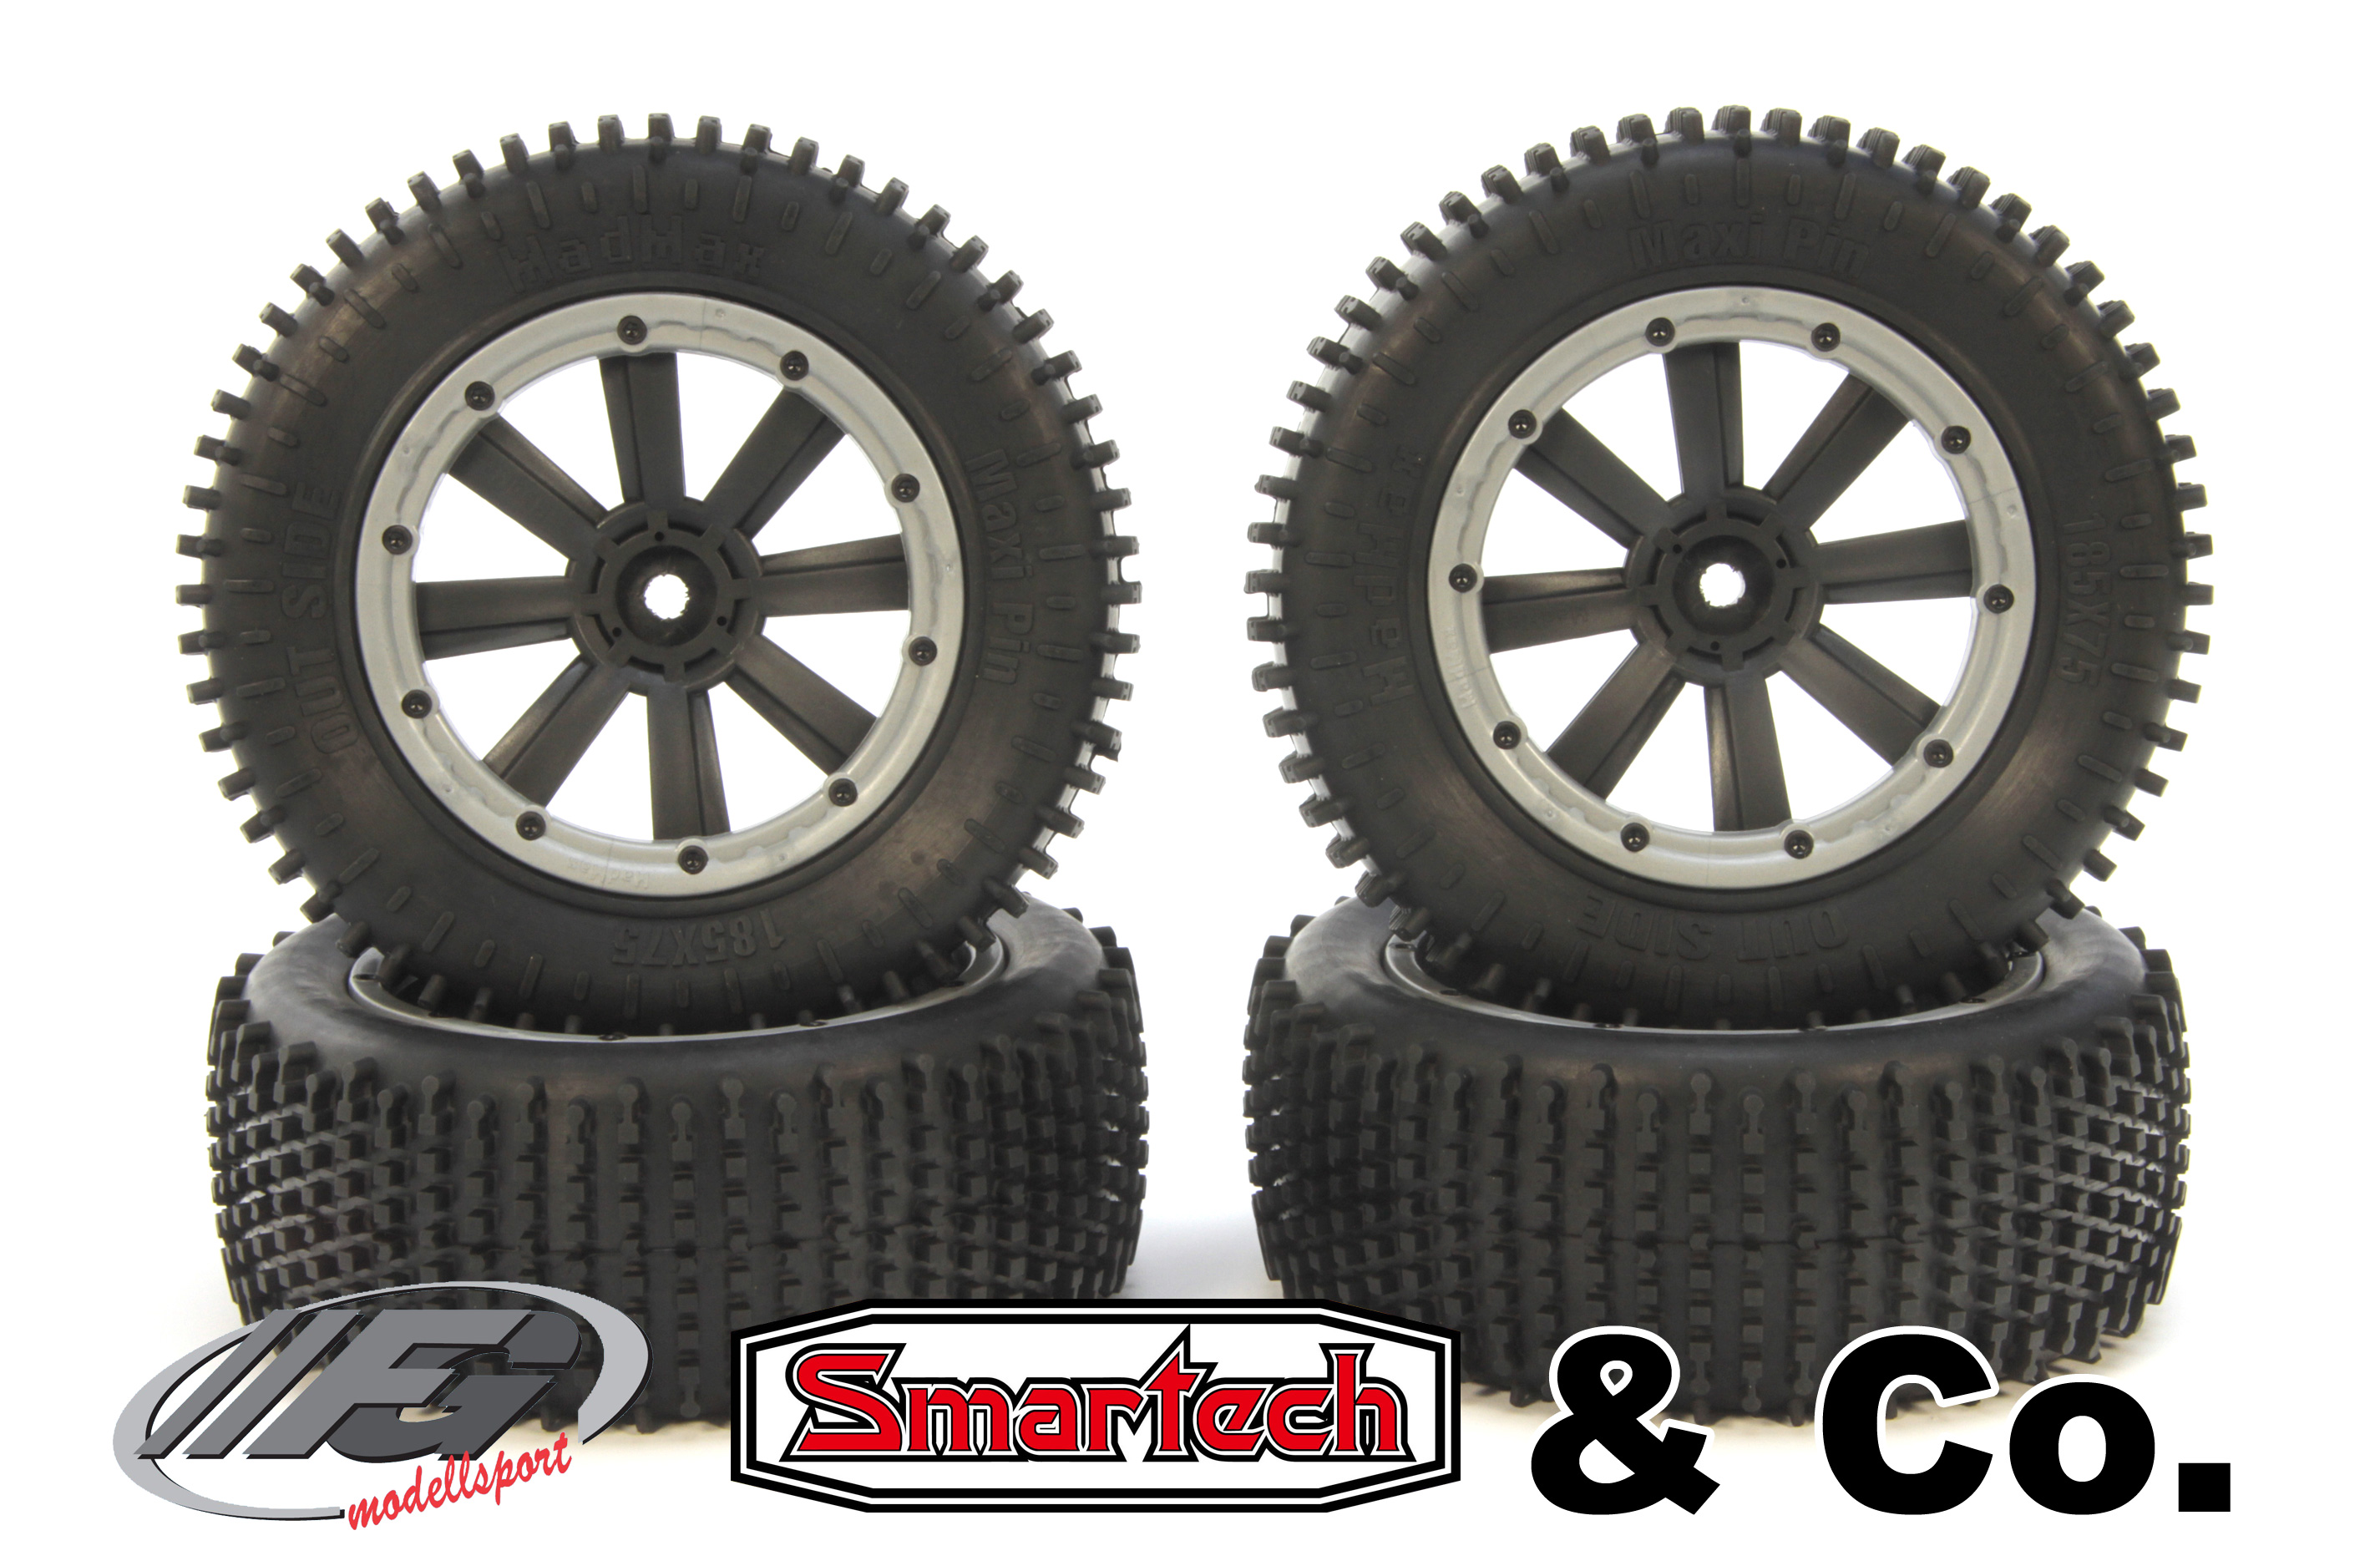 y1445/01 MadMax MAXI PIN tires for FG/Smartech & Co (18mm wheel square)